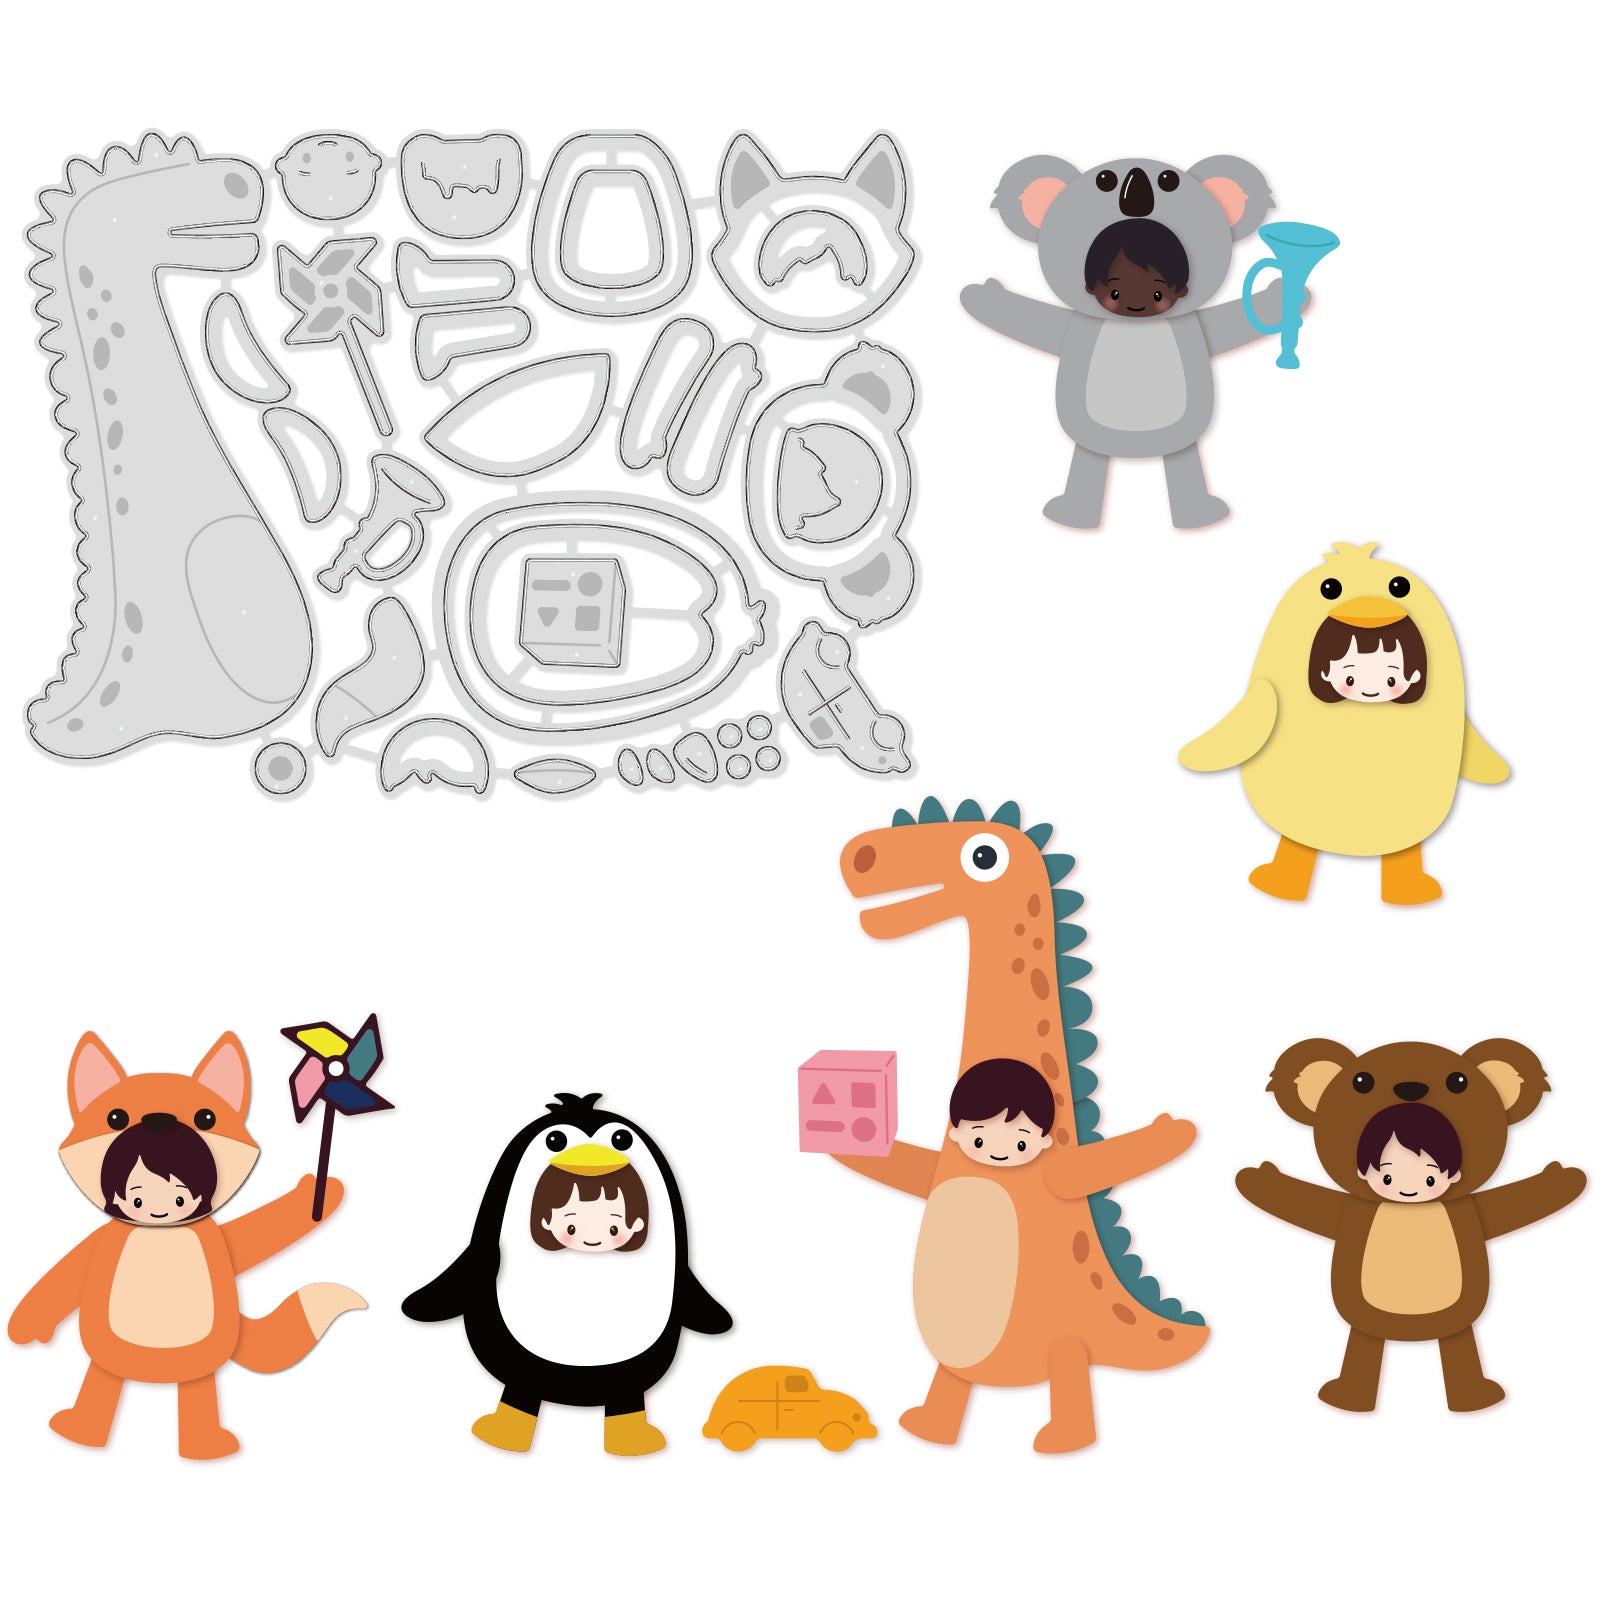 Animal Costumes, Doll Costumes, Dinosaurs, Foxes, Bears, Koalas, Penguins, Ducks, Dress Up, Toys Carbon Steel Cutting Dies Stencils, for DIY Scrapbooking/Photo Album, Decorative Embossing DIY Paper Card